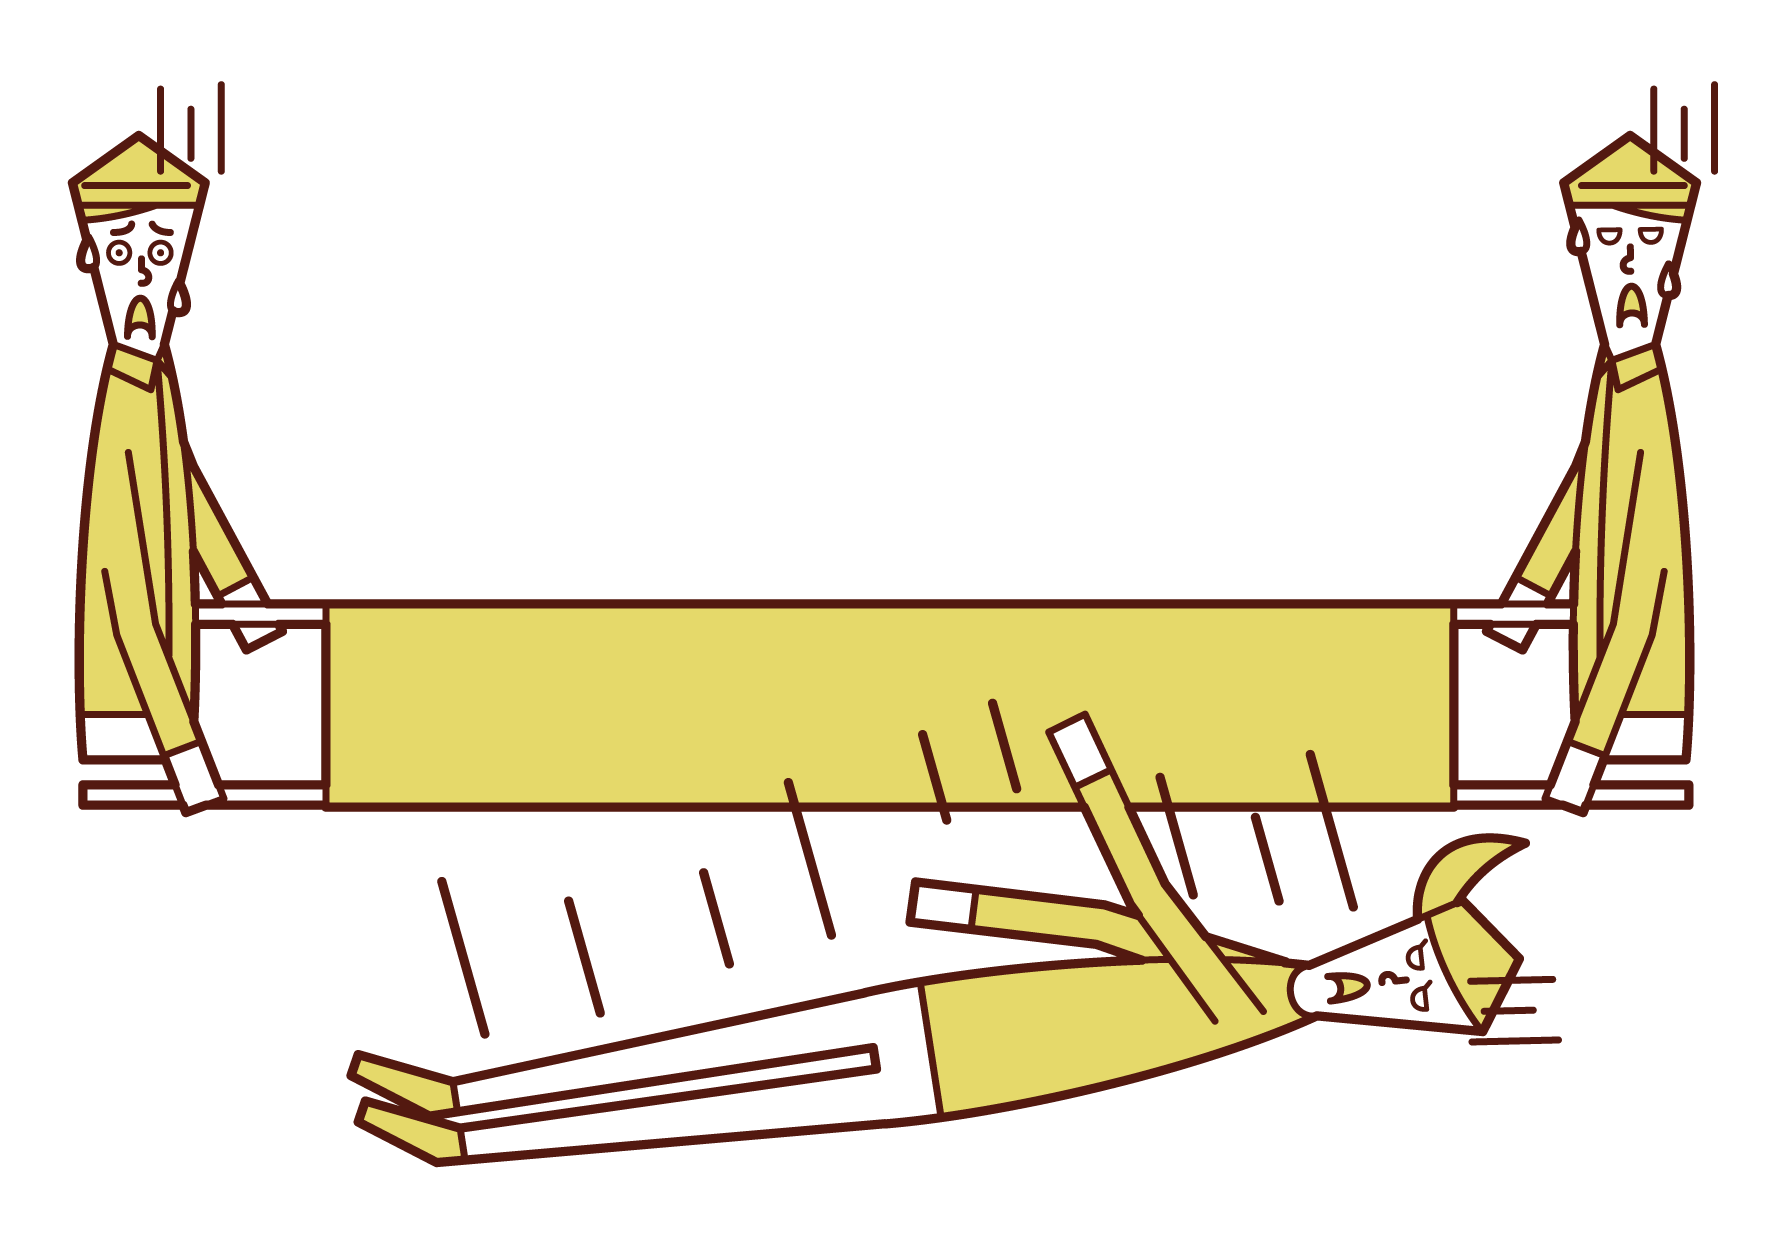 Illustration of a woman falling from a stretcher